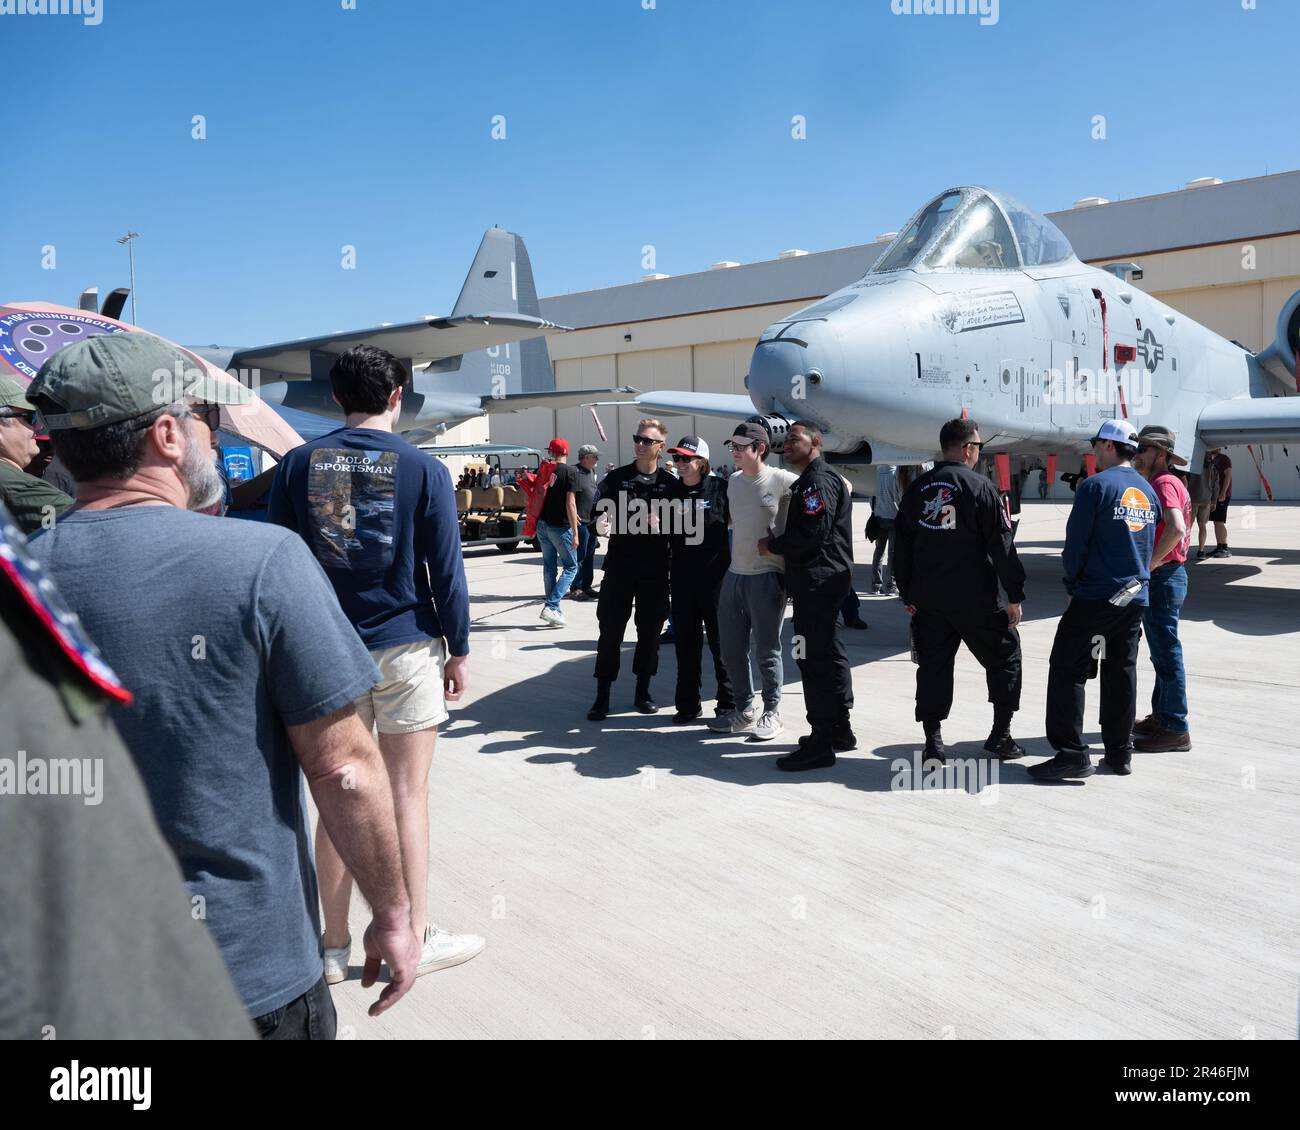 The A-10C Thunderbolt II Demonstration Team interact with air show attendees at Davis-Monthan Air Force Base, Arizona, March 25, 2023. The airshow was open to the public as a way to connect the base and local community while also highlighting the mission and capabilities of the U.S. Air Force. Stock Photo